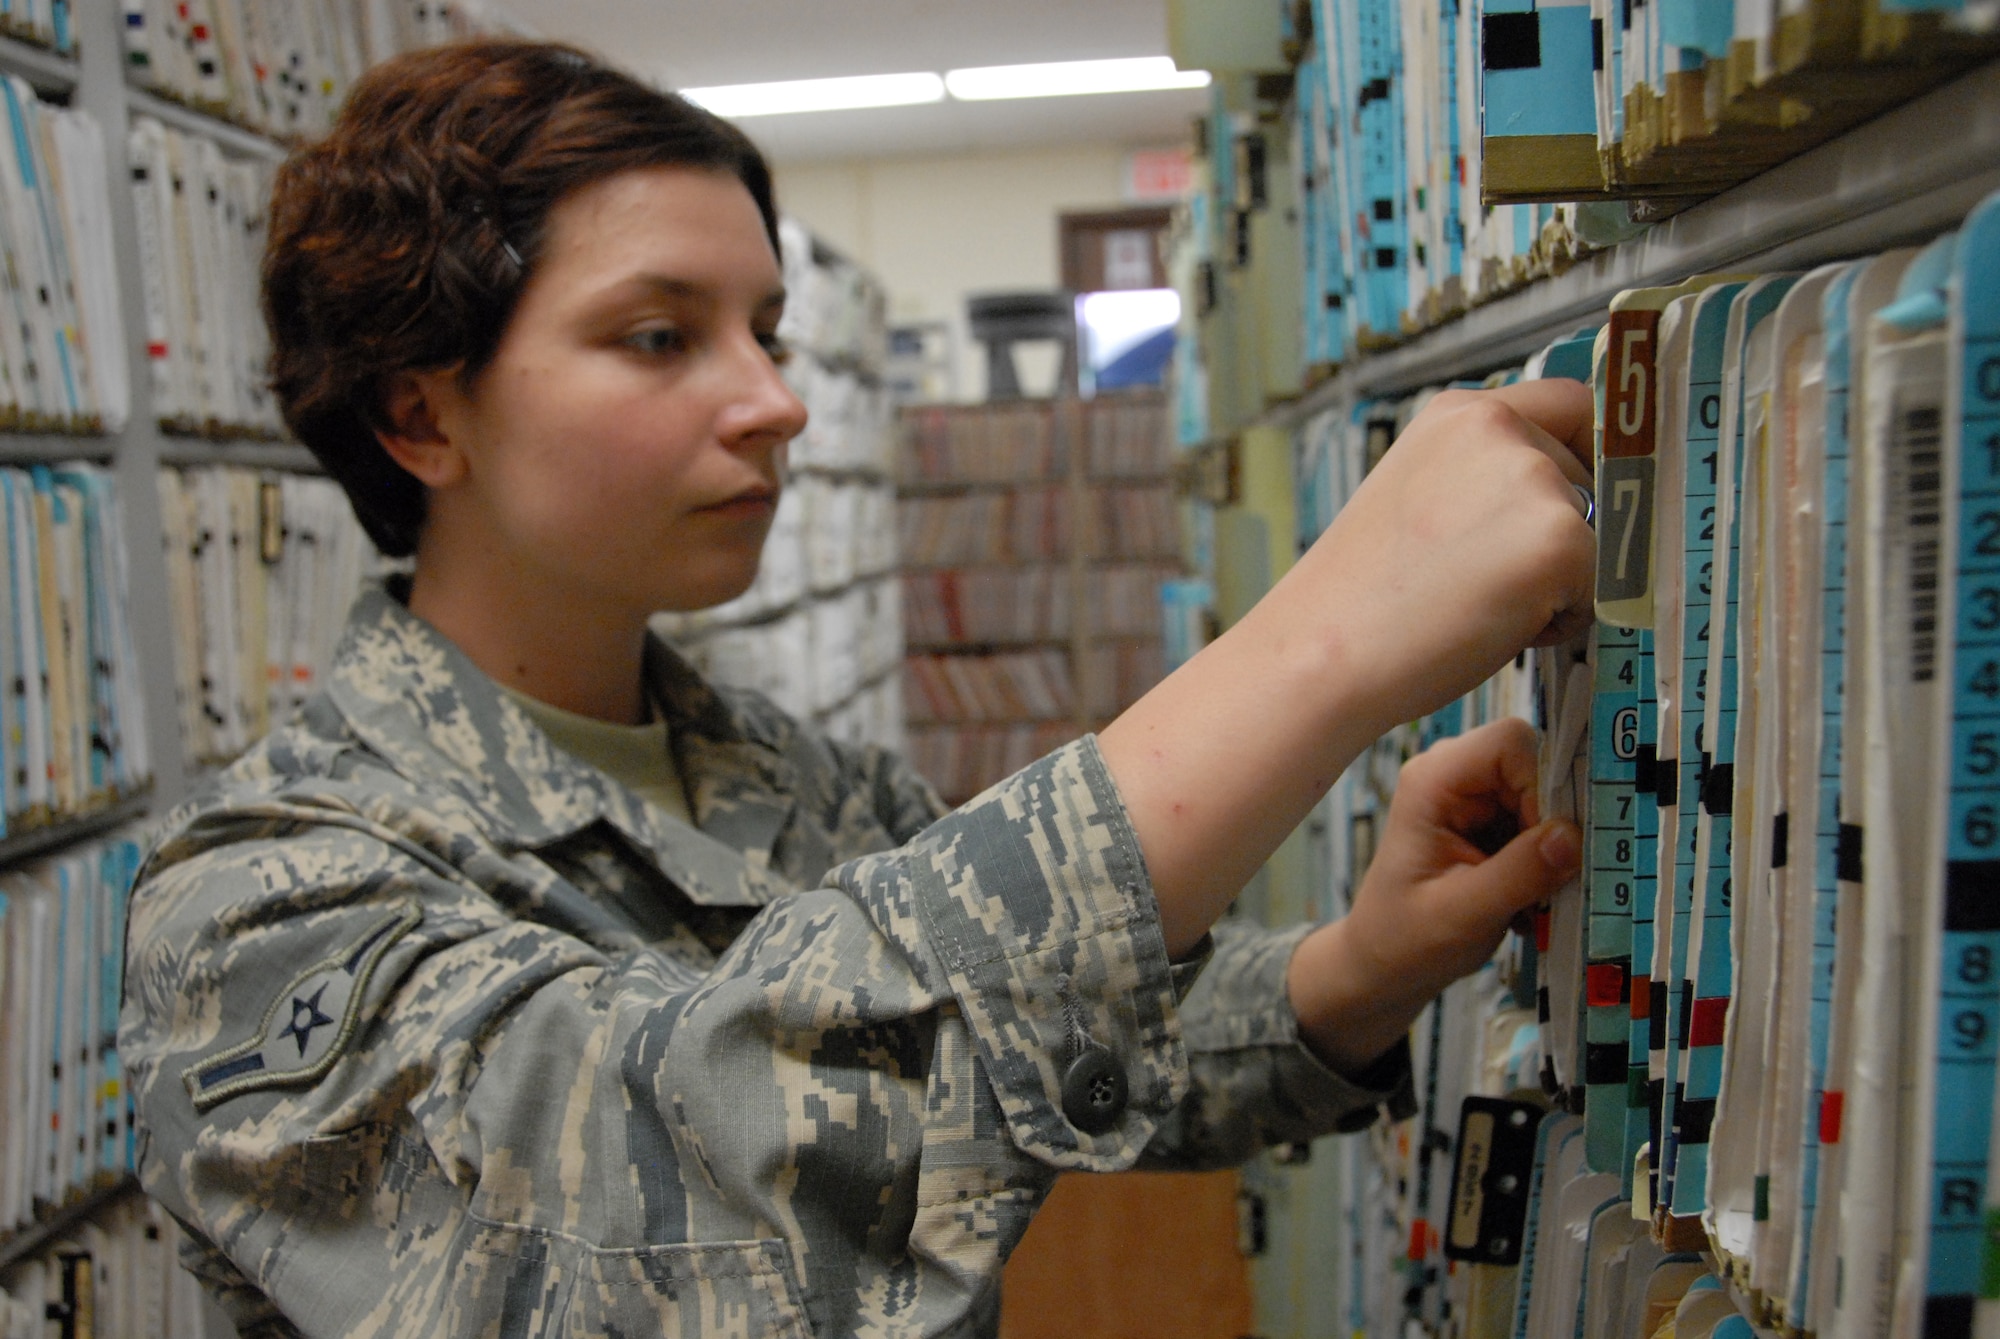 Oregon Air National Guard Airman Alexa Ferris conducts a quality check on patient records in the Outpatient Records section at Tripler Army Medical Center, in Honolulu, Hawaii, Aug. 28, 2018. Ferris and her fellow Airmen from the 142nd Medical Group took part in Medical Facilities Annual Training, Aug. 18-31, 2018, and were able to assist in a real-world support mission when Hurricane Lane threatened to strike the Hawaiian Islands the week of Aug. 20, 2018. (U.S. Air National Guard Photo by Master Sgt. Nick Choy)